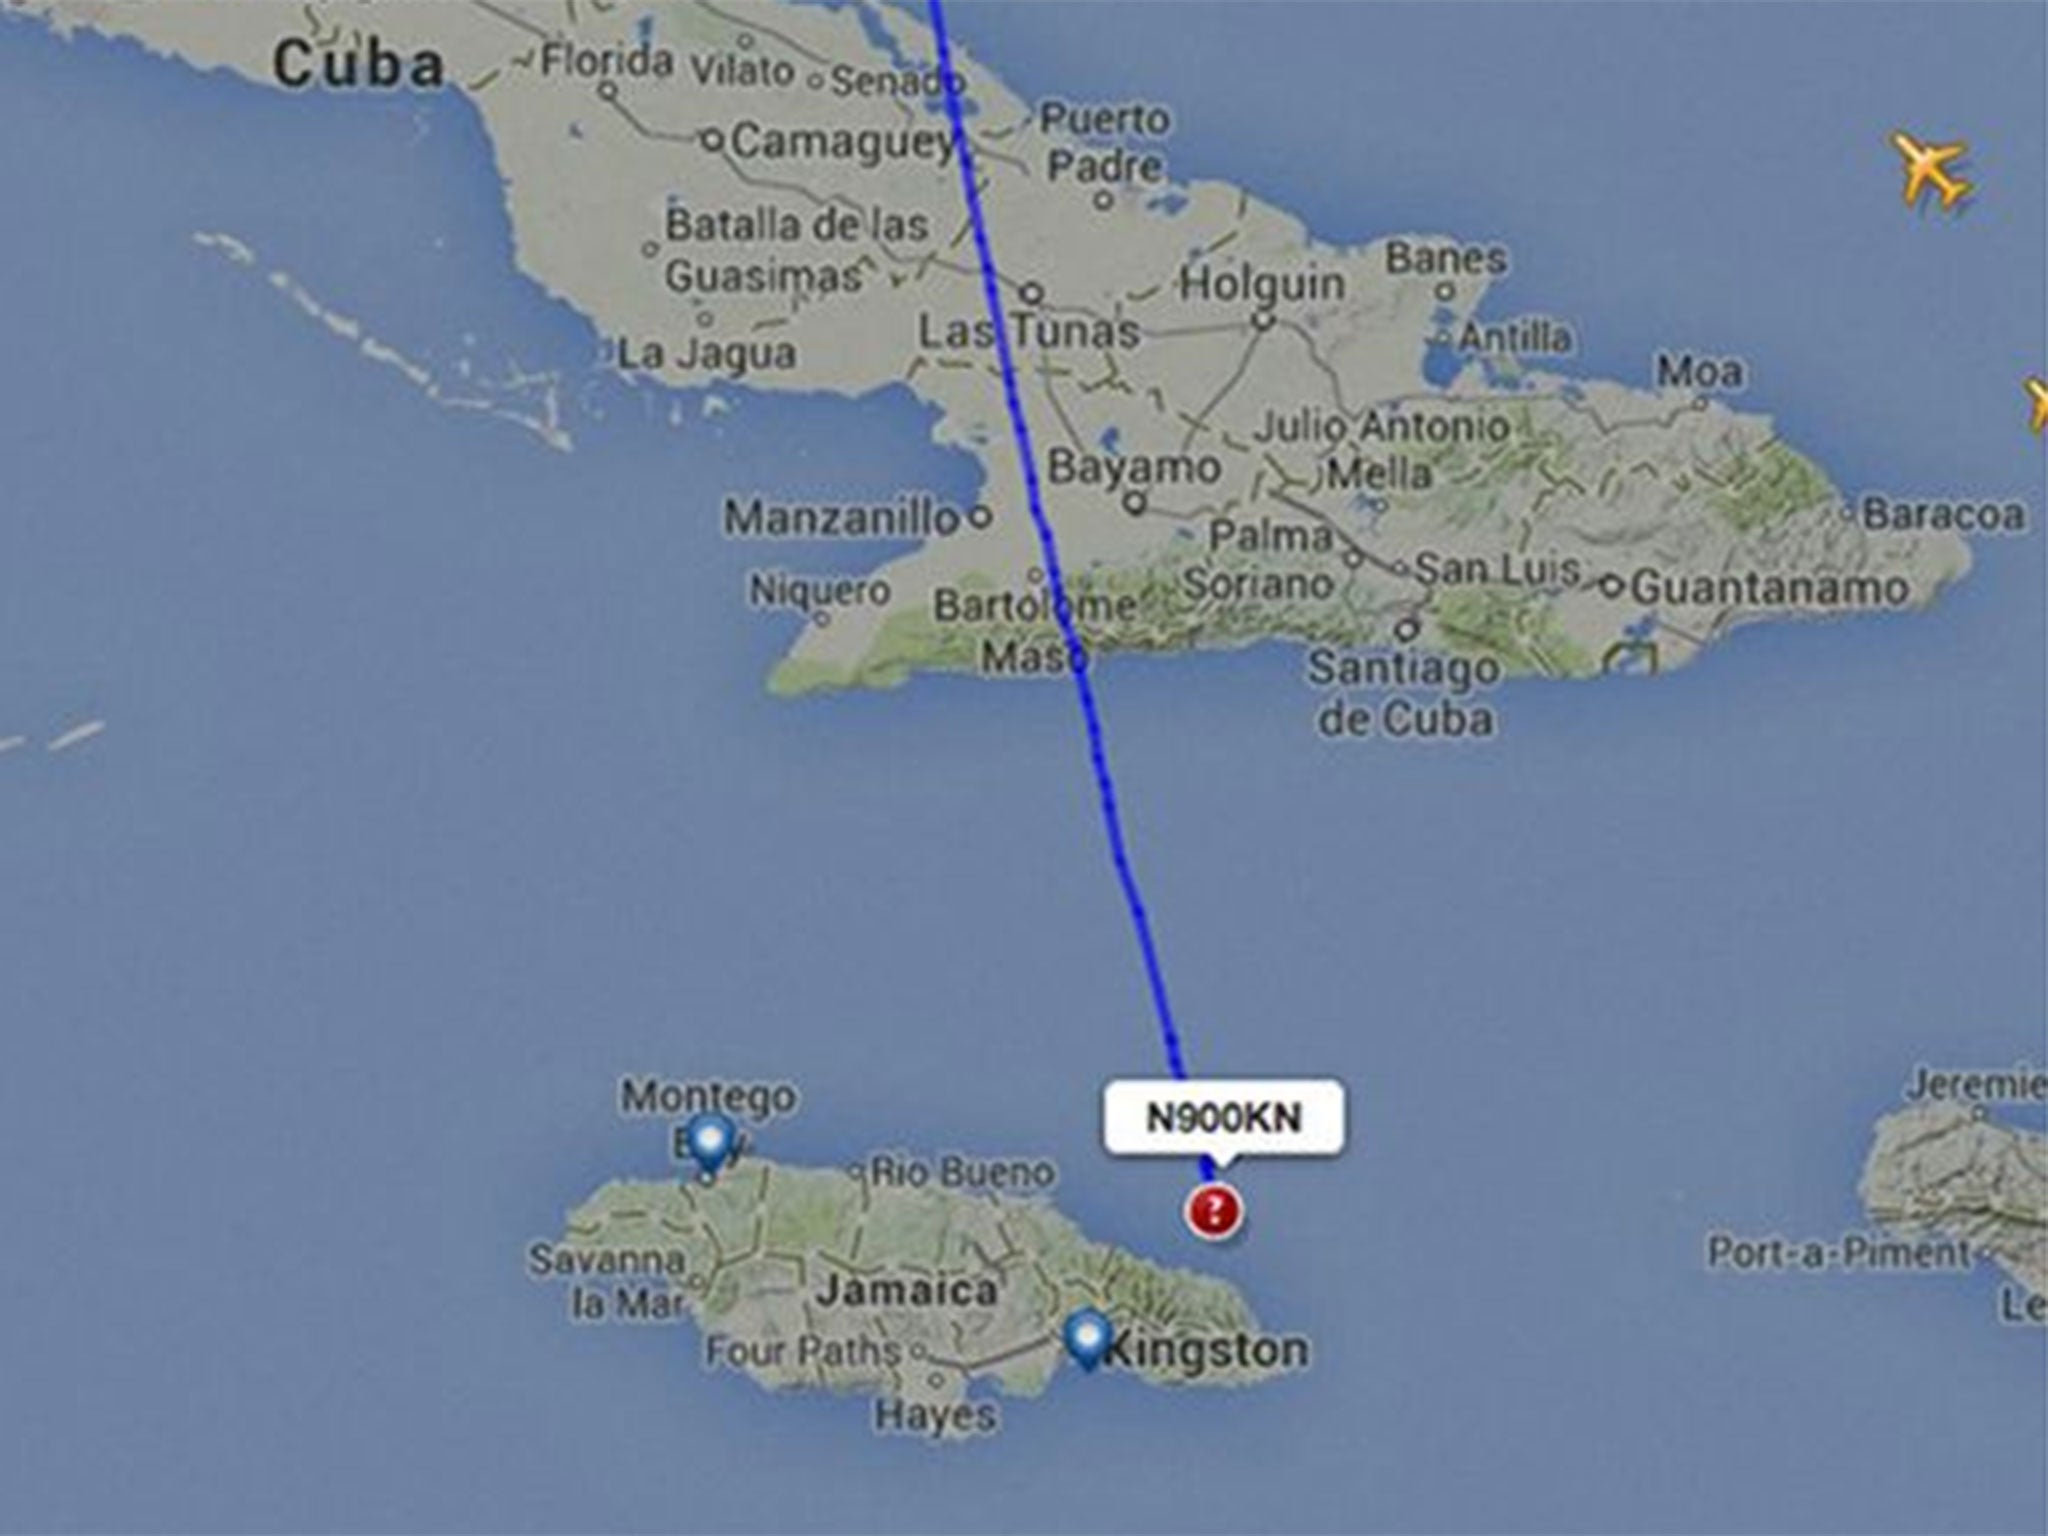 The route of the that plane crashed on the island of Jamaica